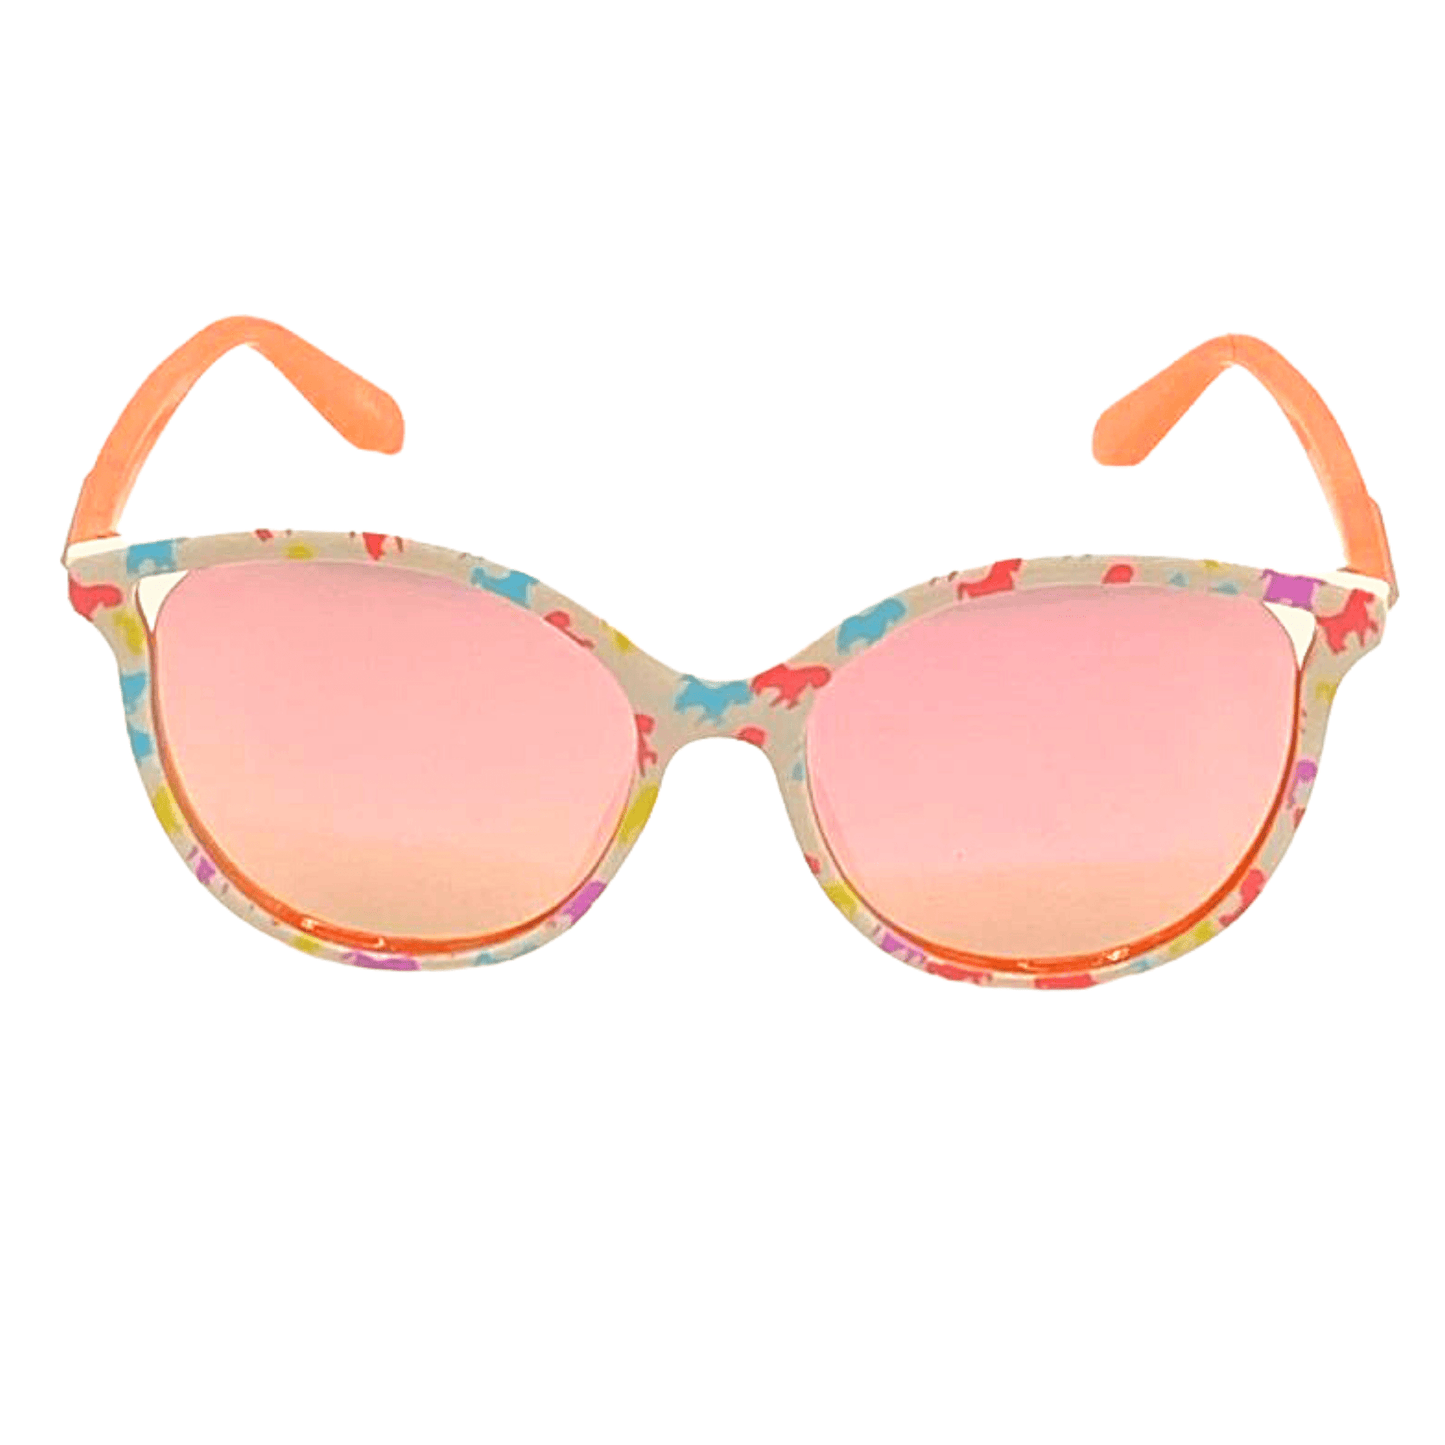 These round, full-framed, white and coral unicorn sunglasses are just what your princess needs for summer. 